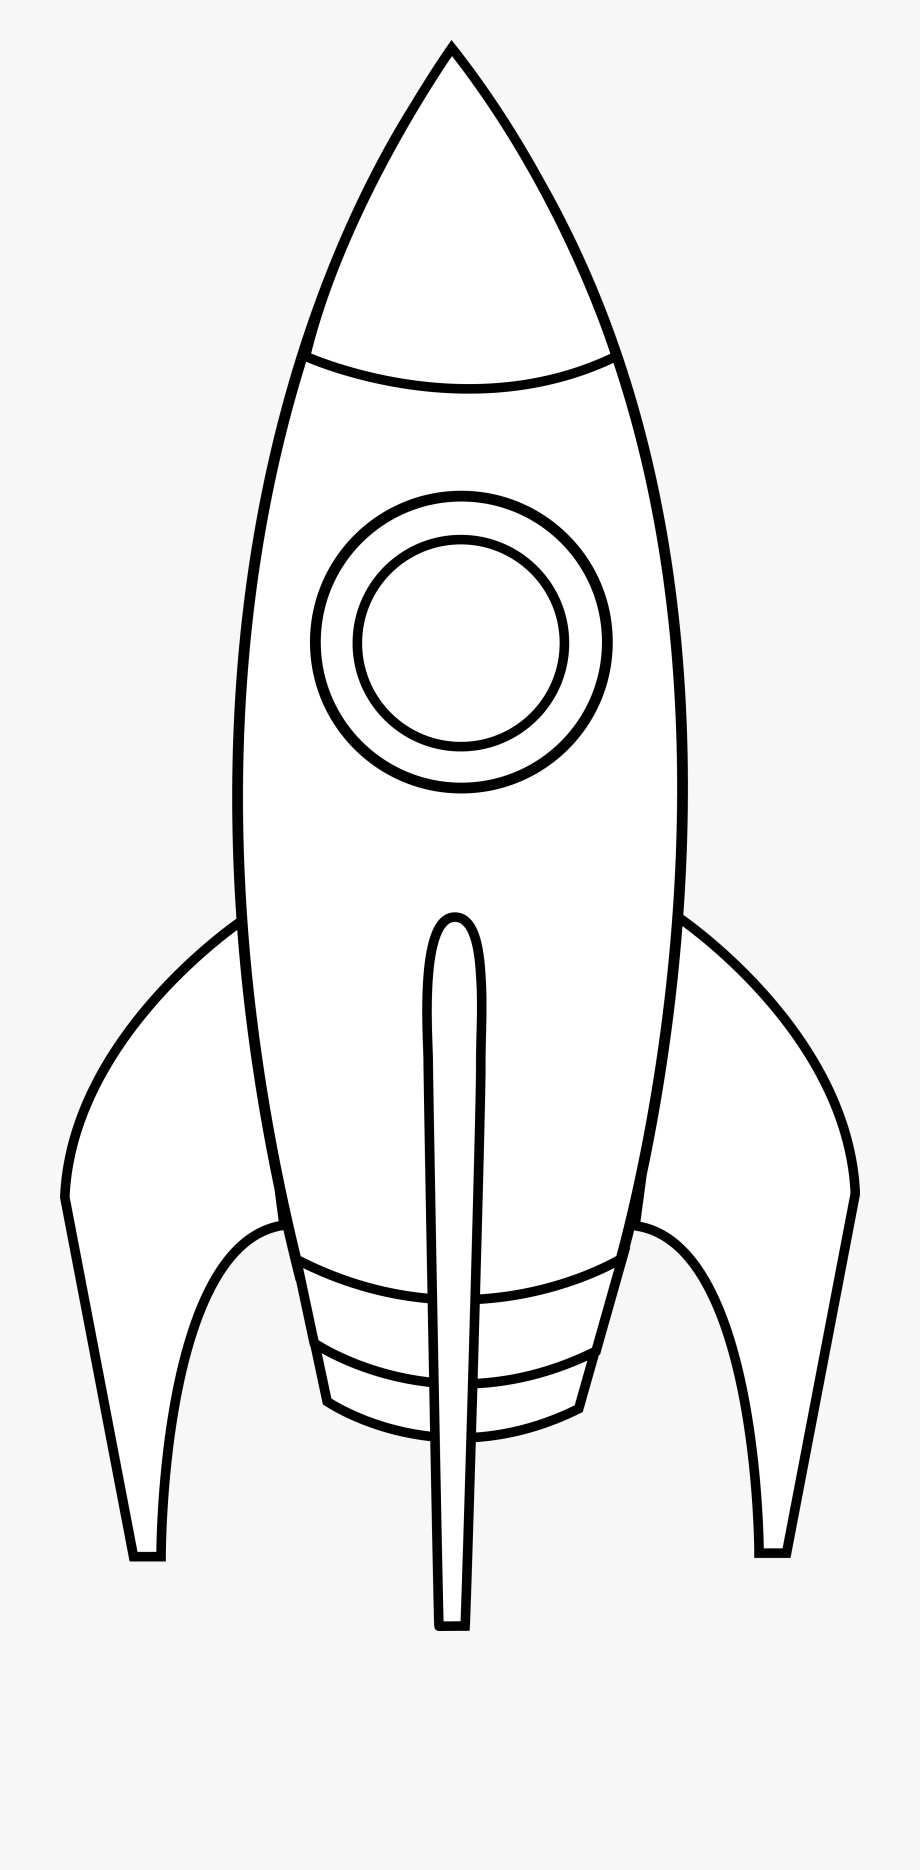 Rocket Cartoon Images Black And White - Goimages Connect